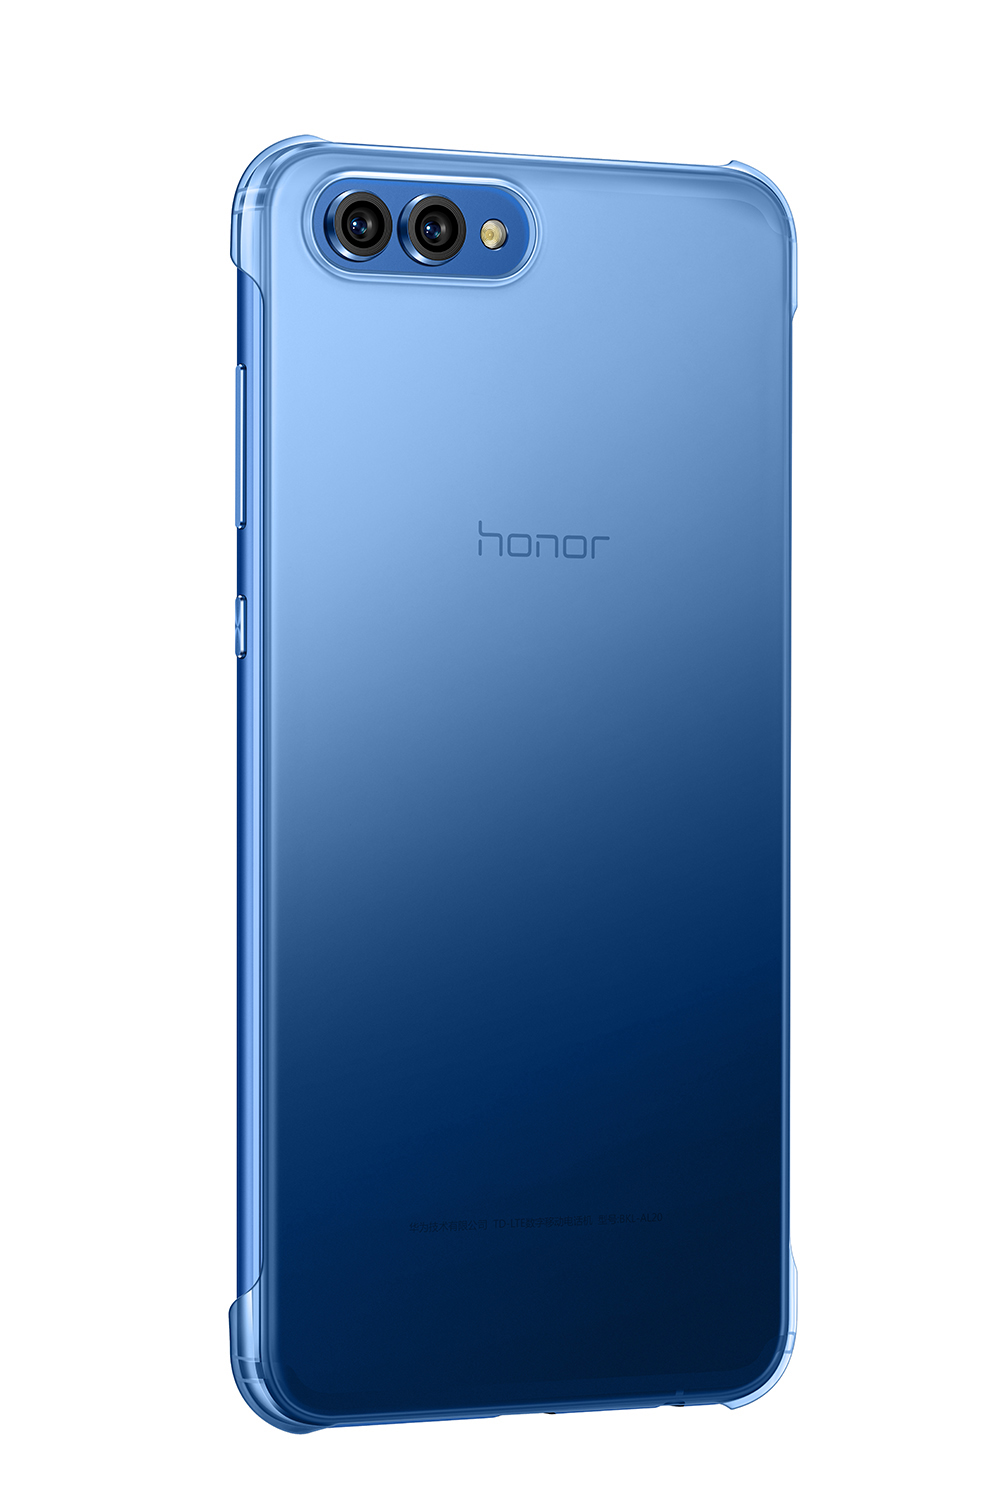 10, View Magnet, HONOR Honor, Blau Backcover,